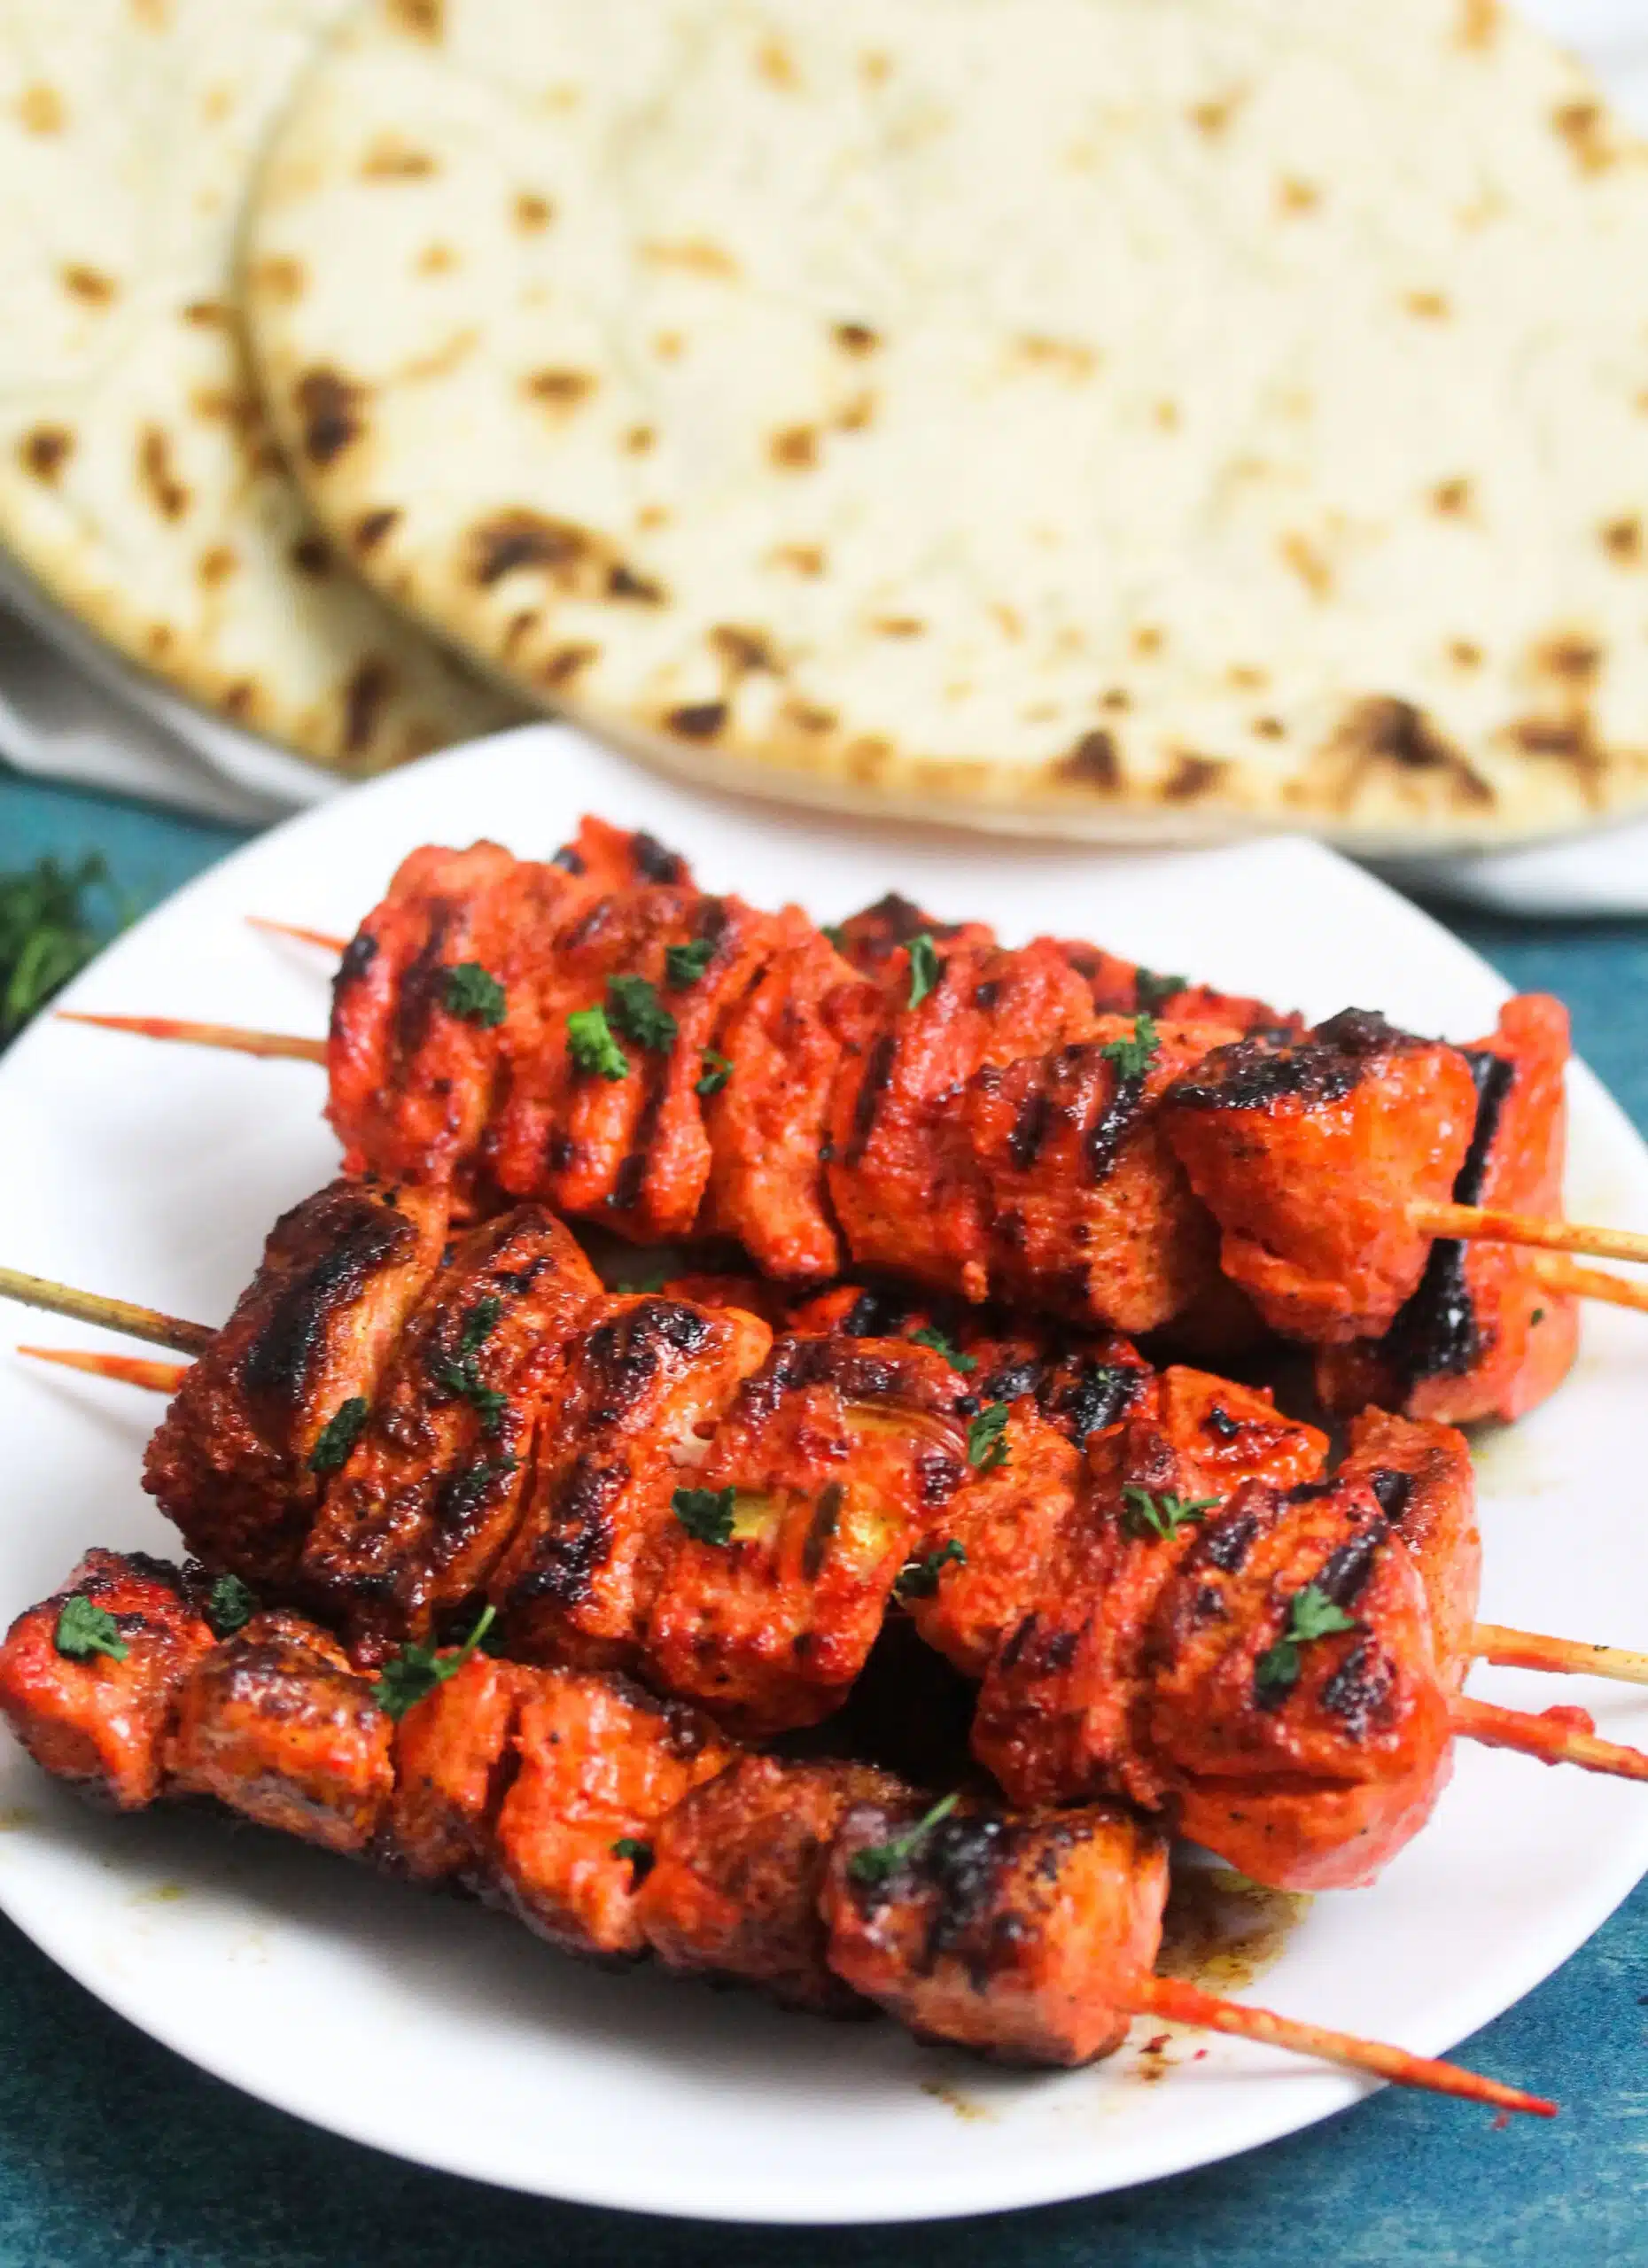 Indian Tandoori chicken kebabs on a white plate with naan bread in the background.